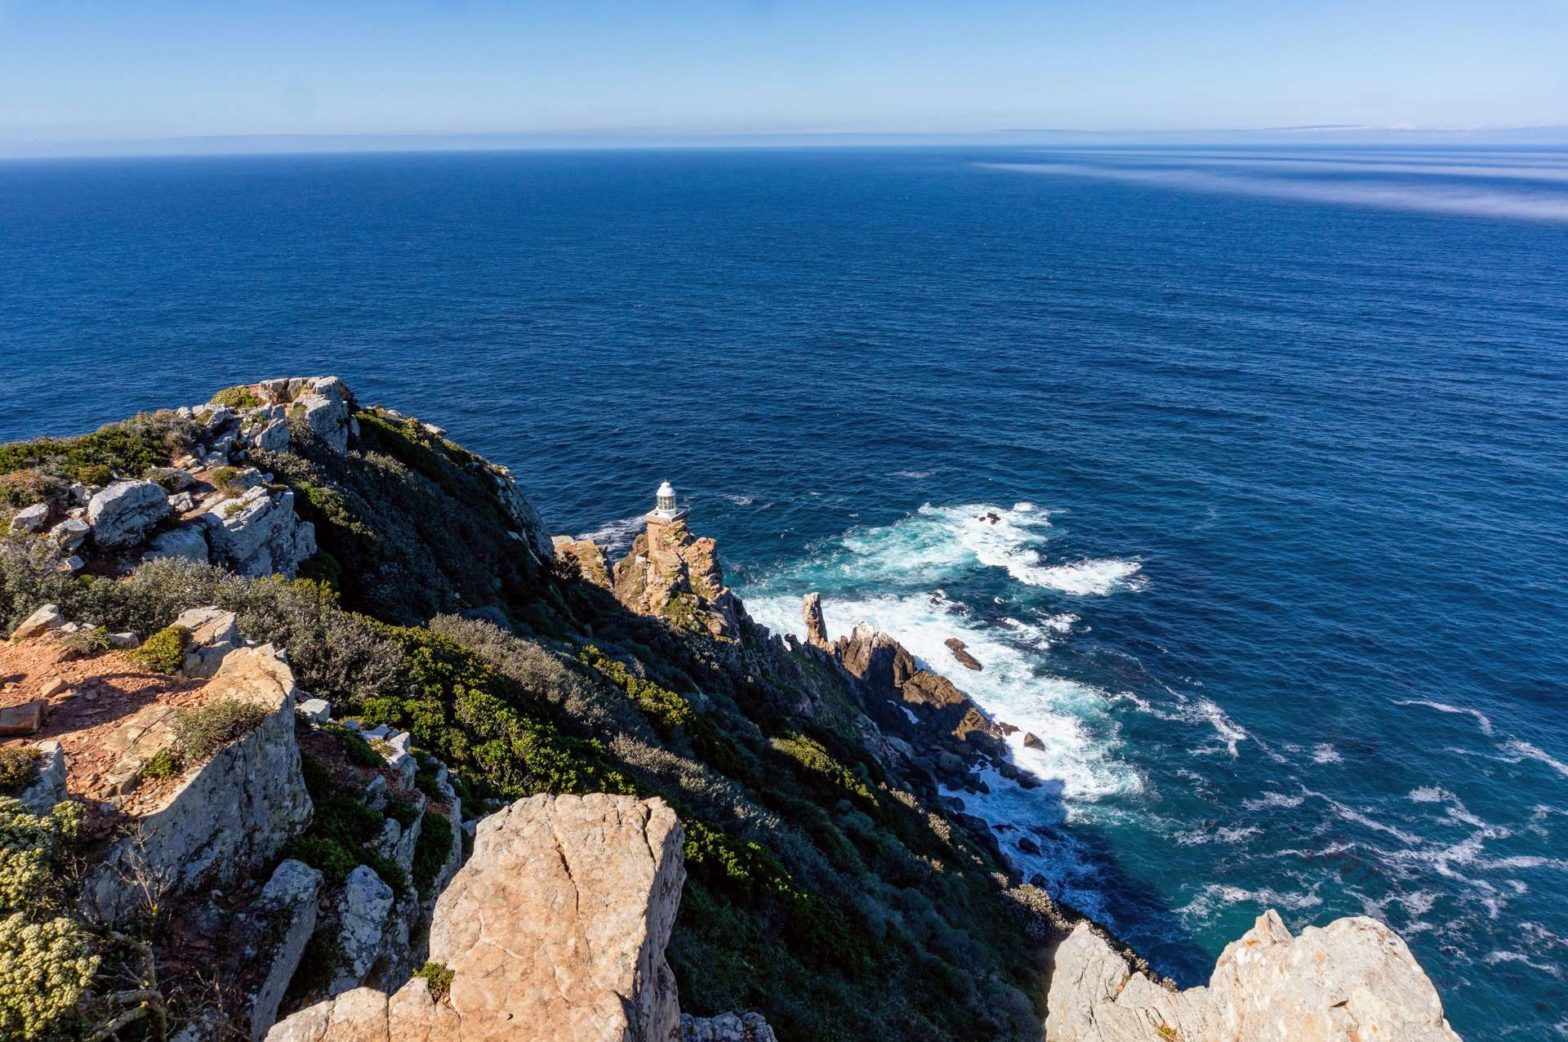 The new Cape Point lighthouse